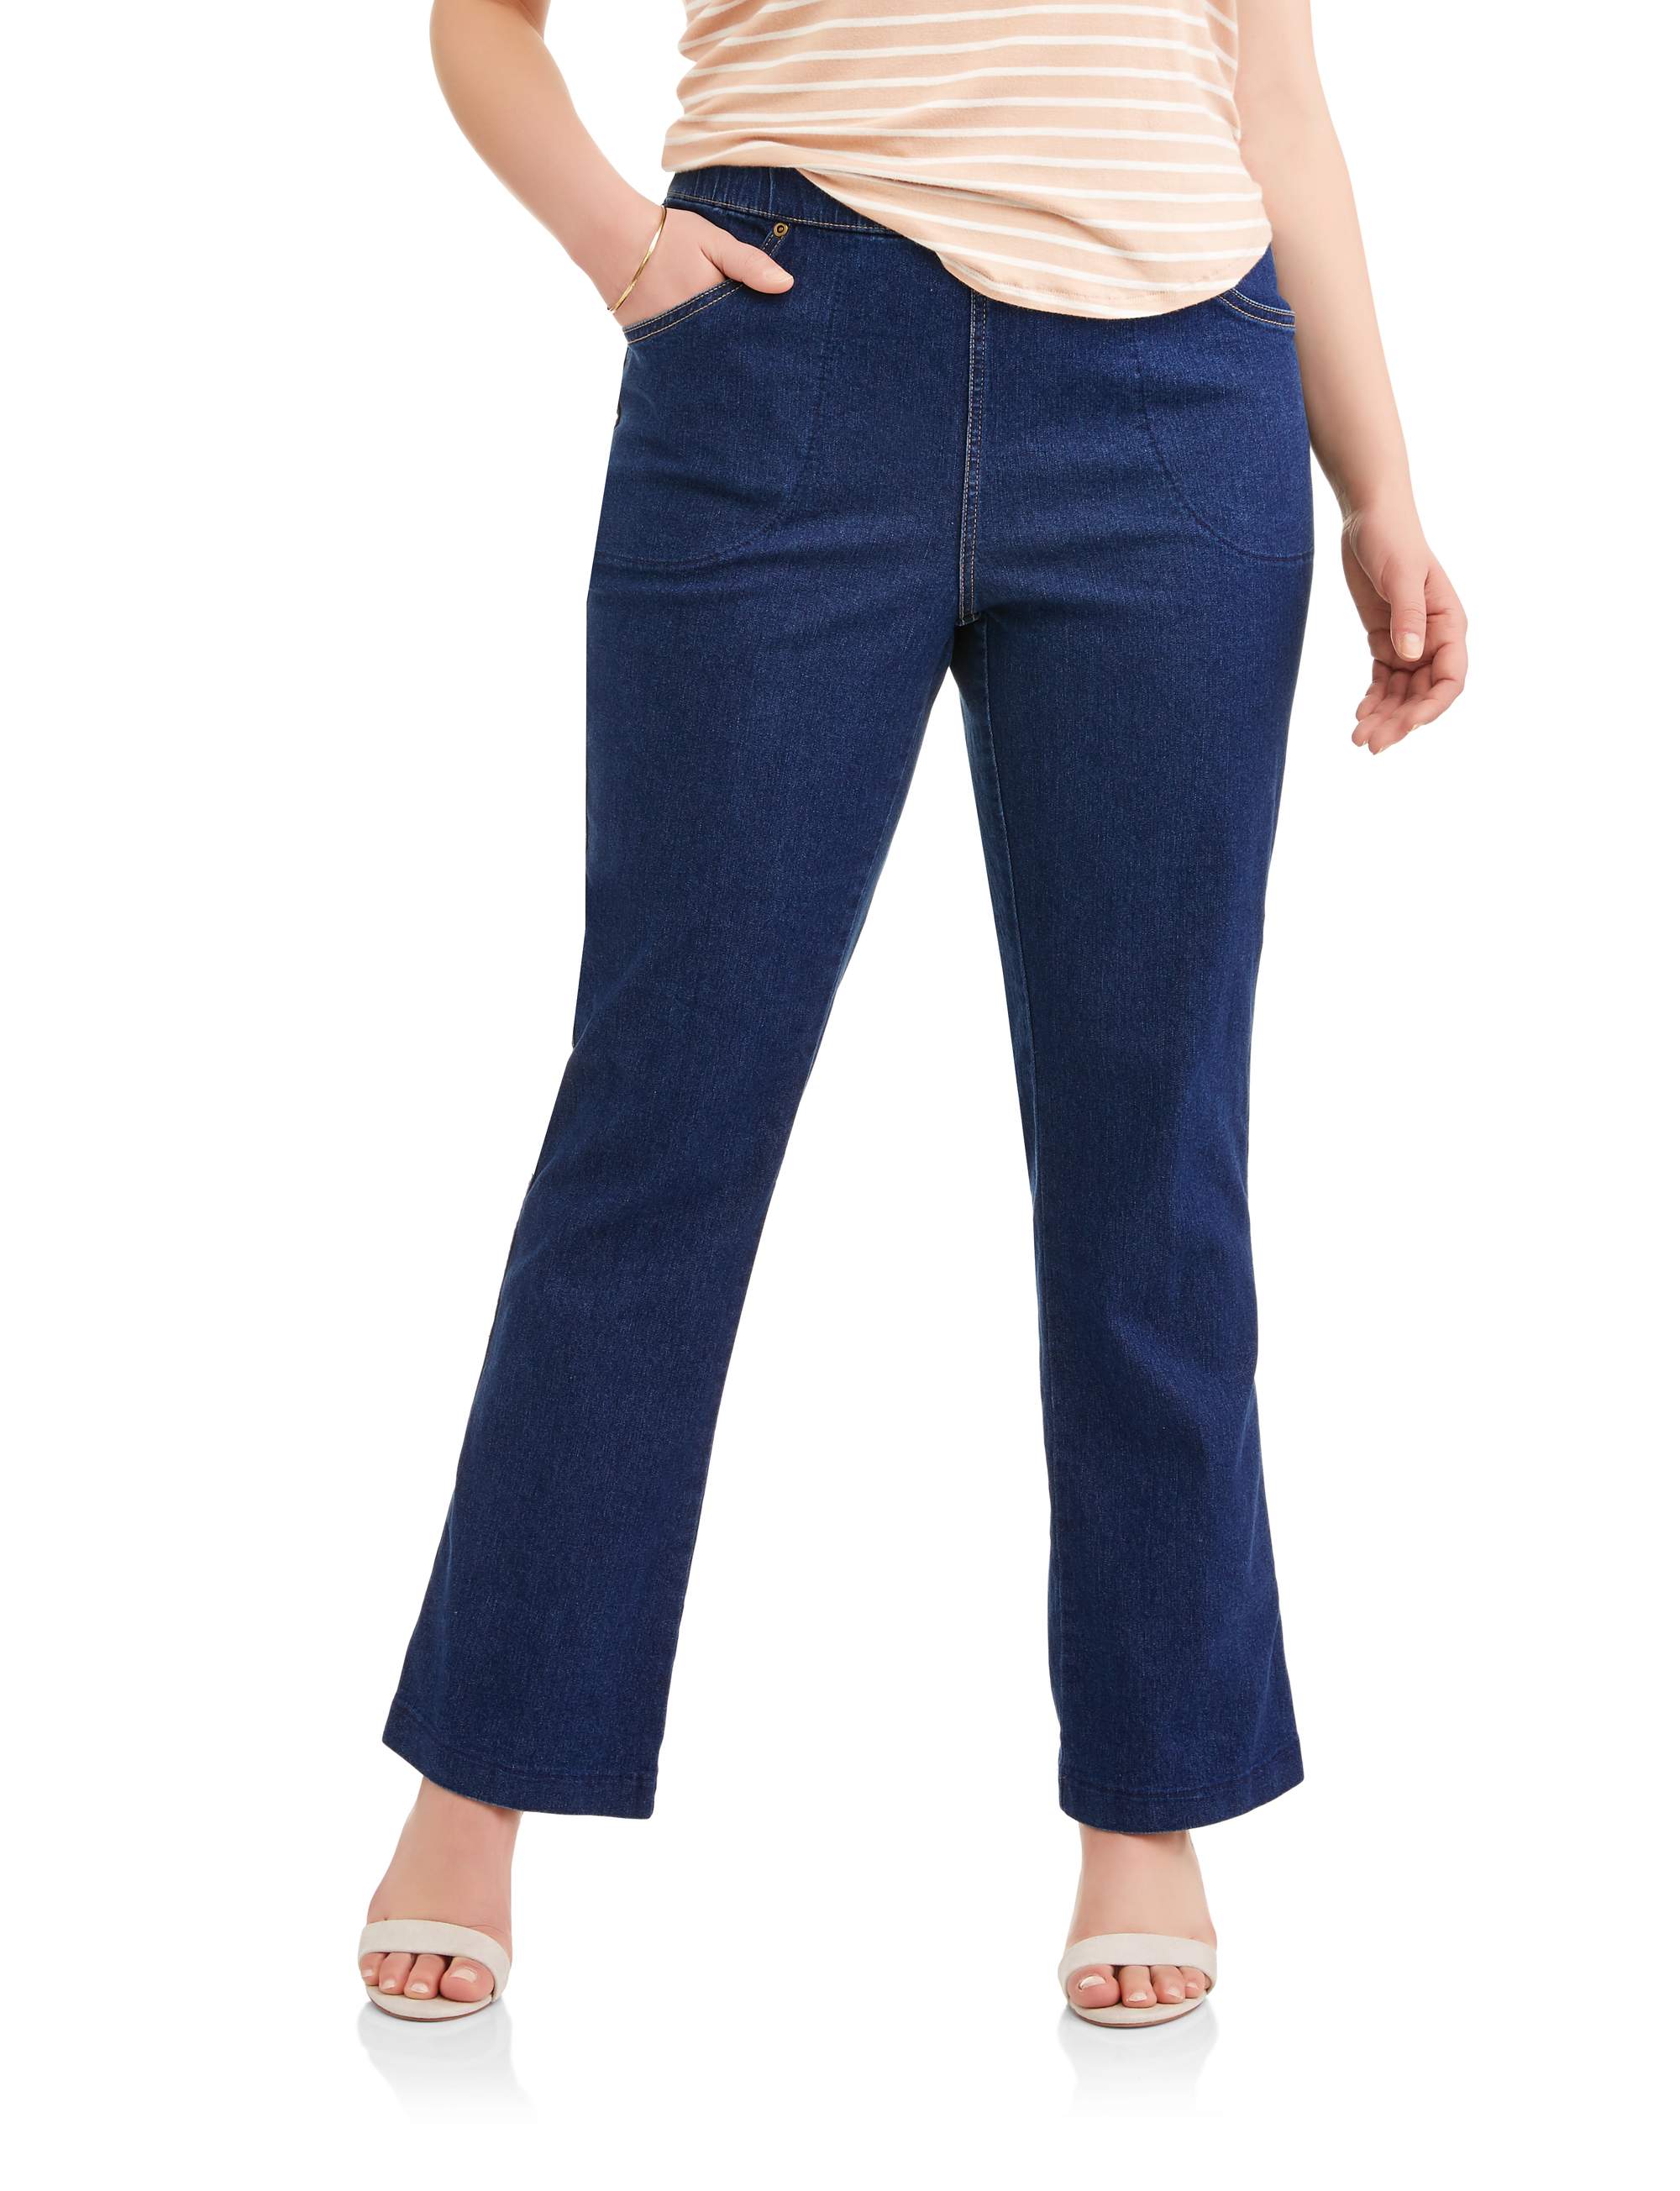 Petite Length 2X Just My Size Womens 2-Pocket Flat-Front Jeans